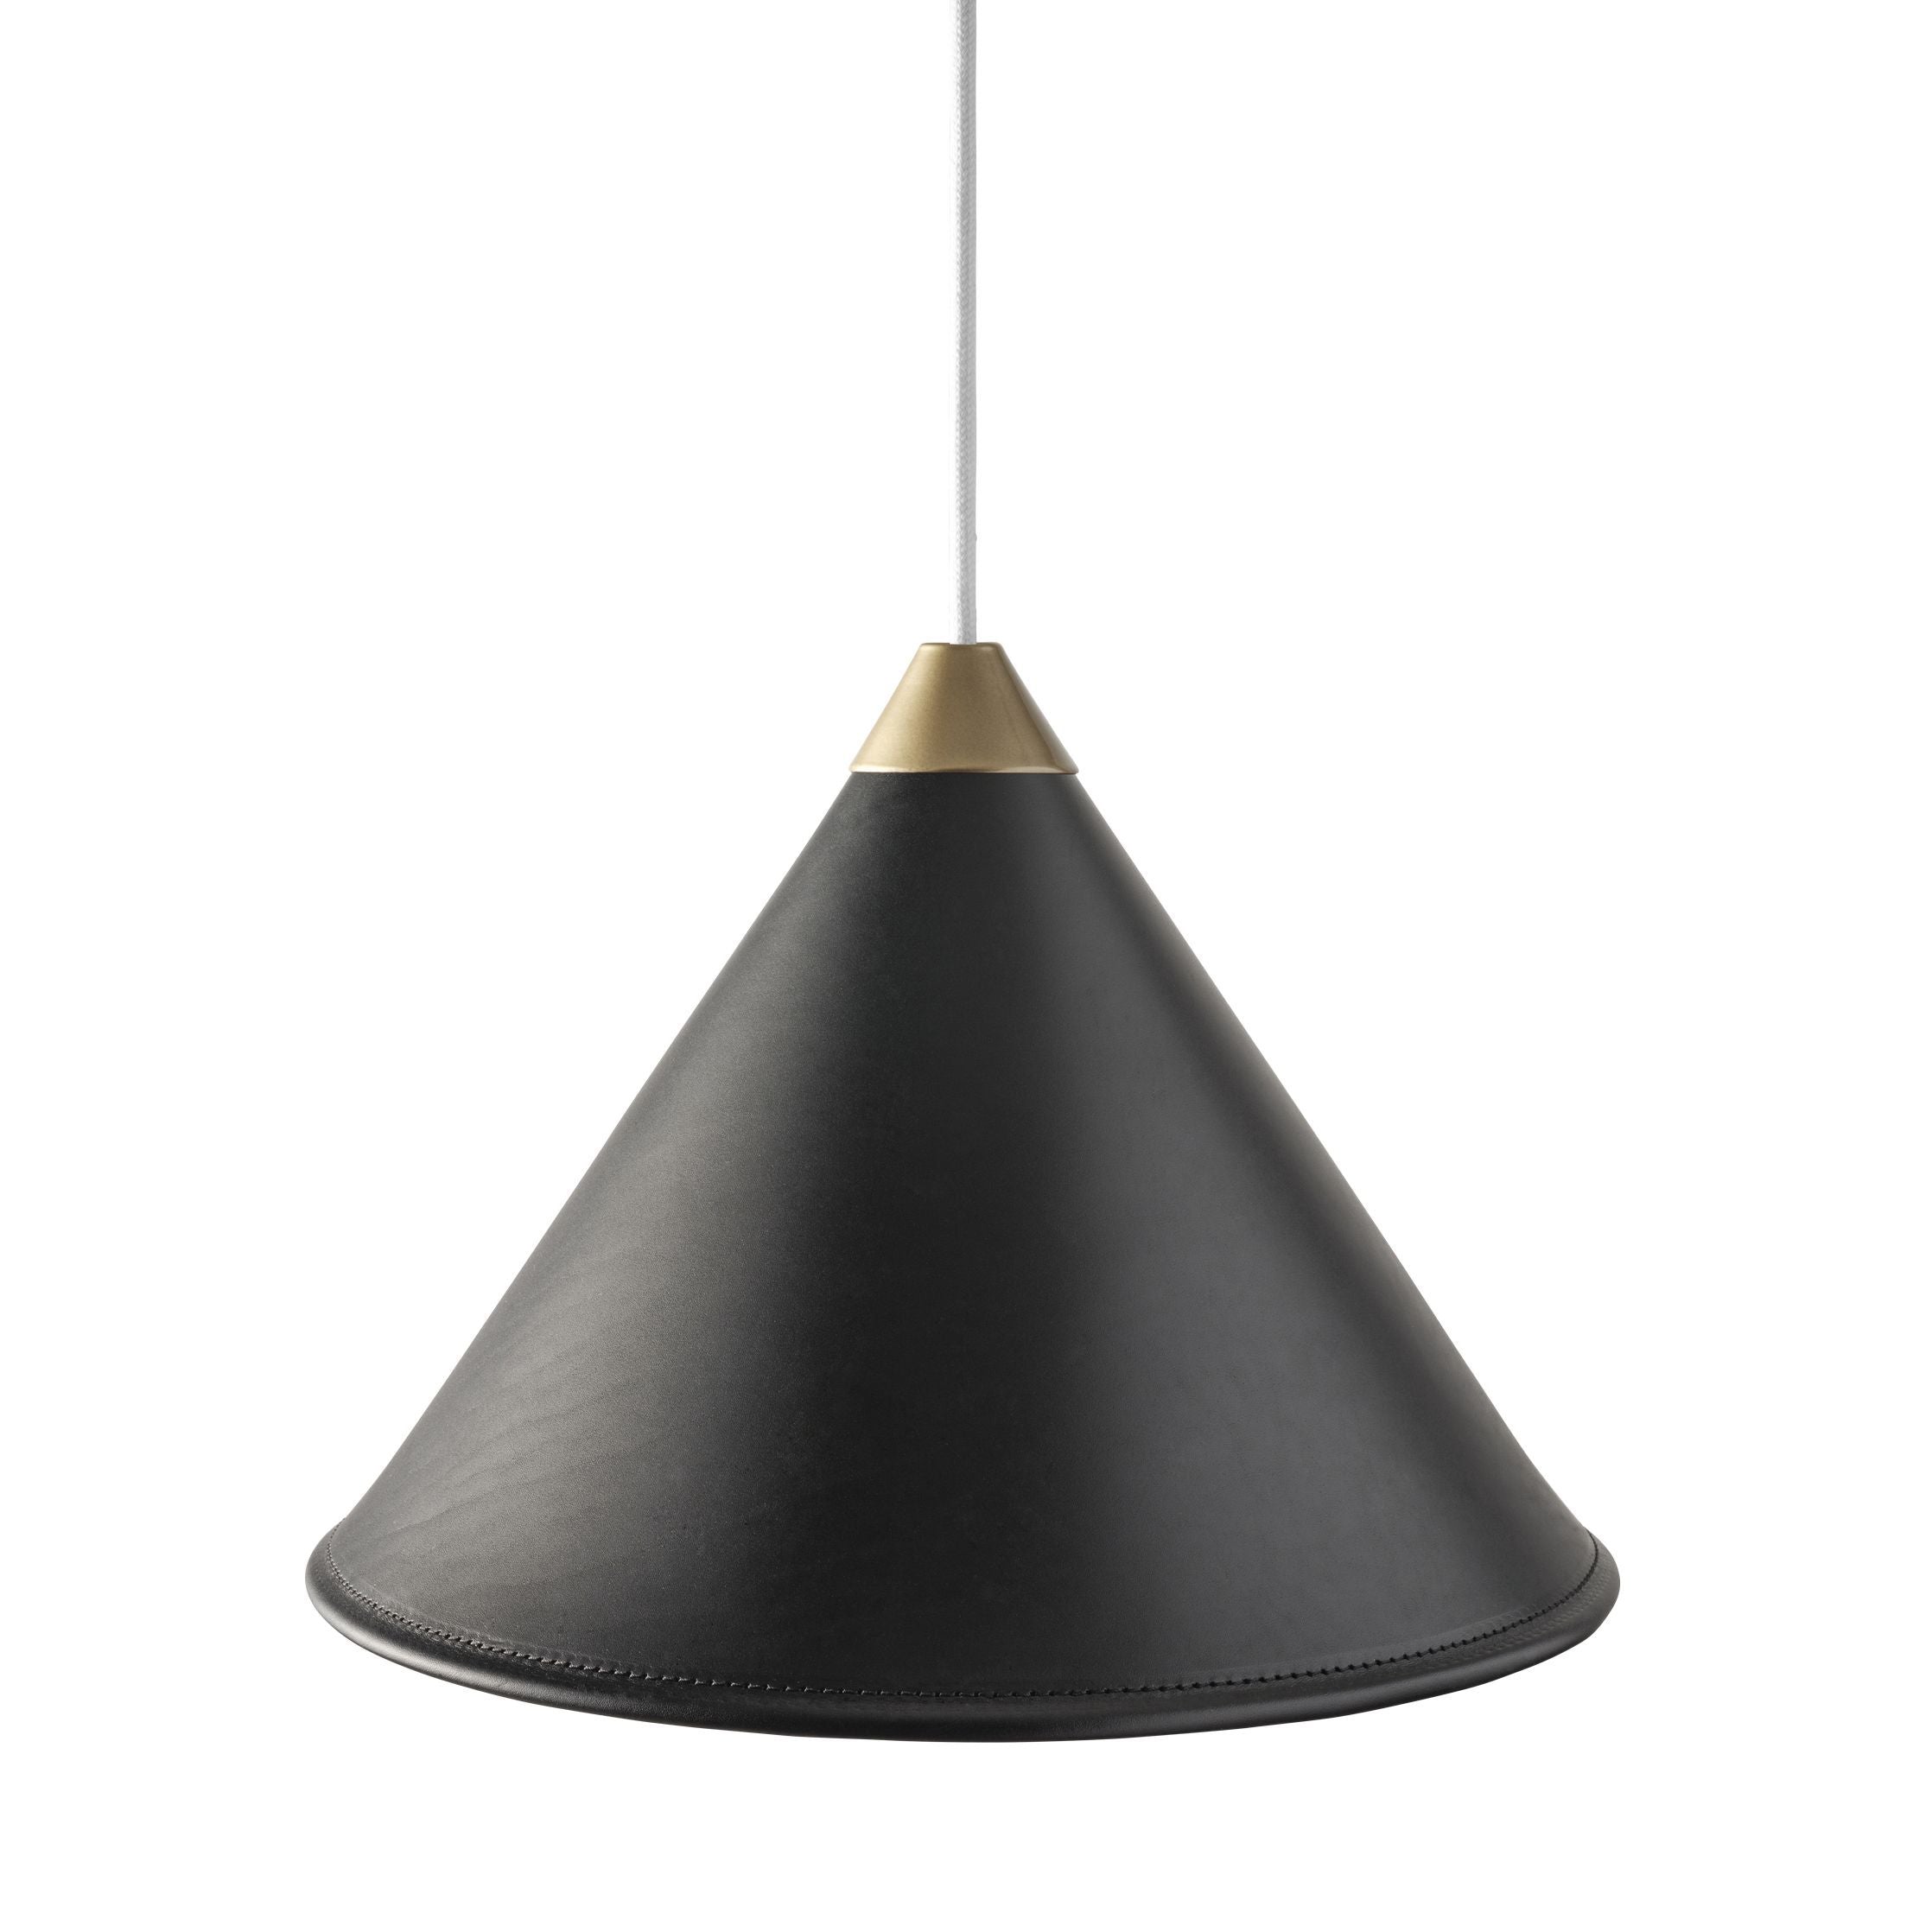 Cuero Namibia Pendant ø 35 Cm, Black/Brass With White Cable